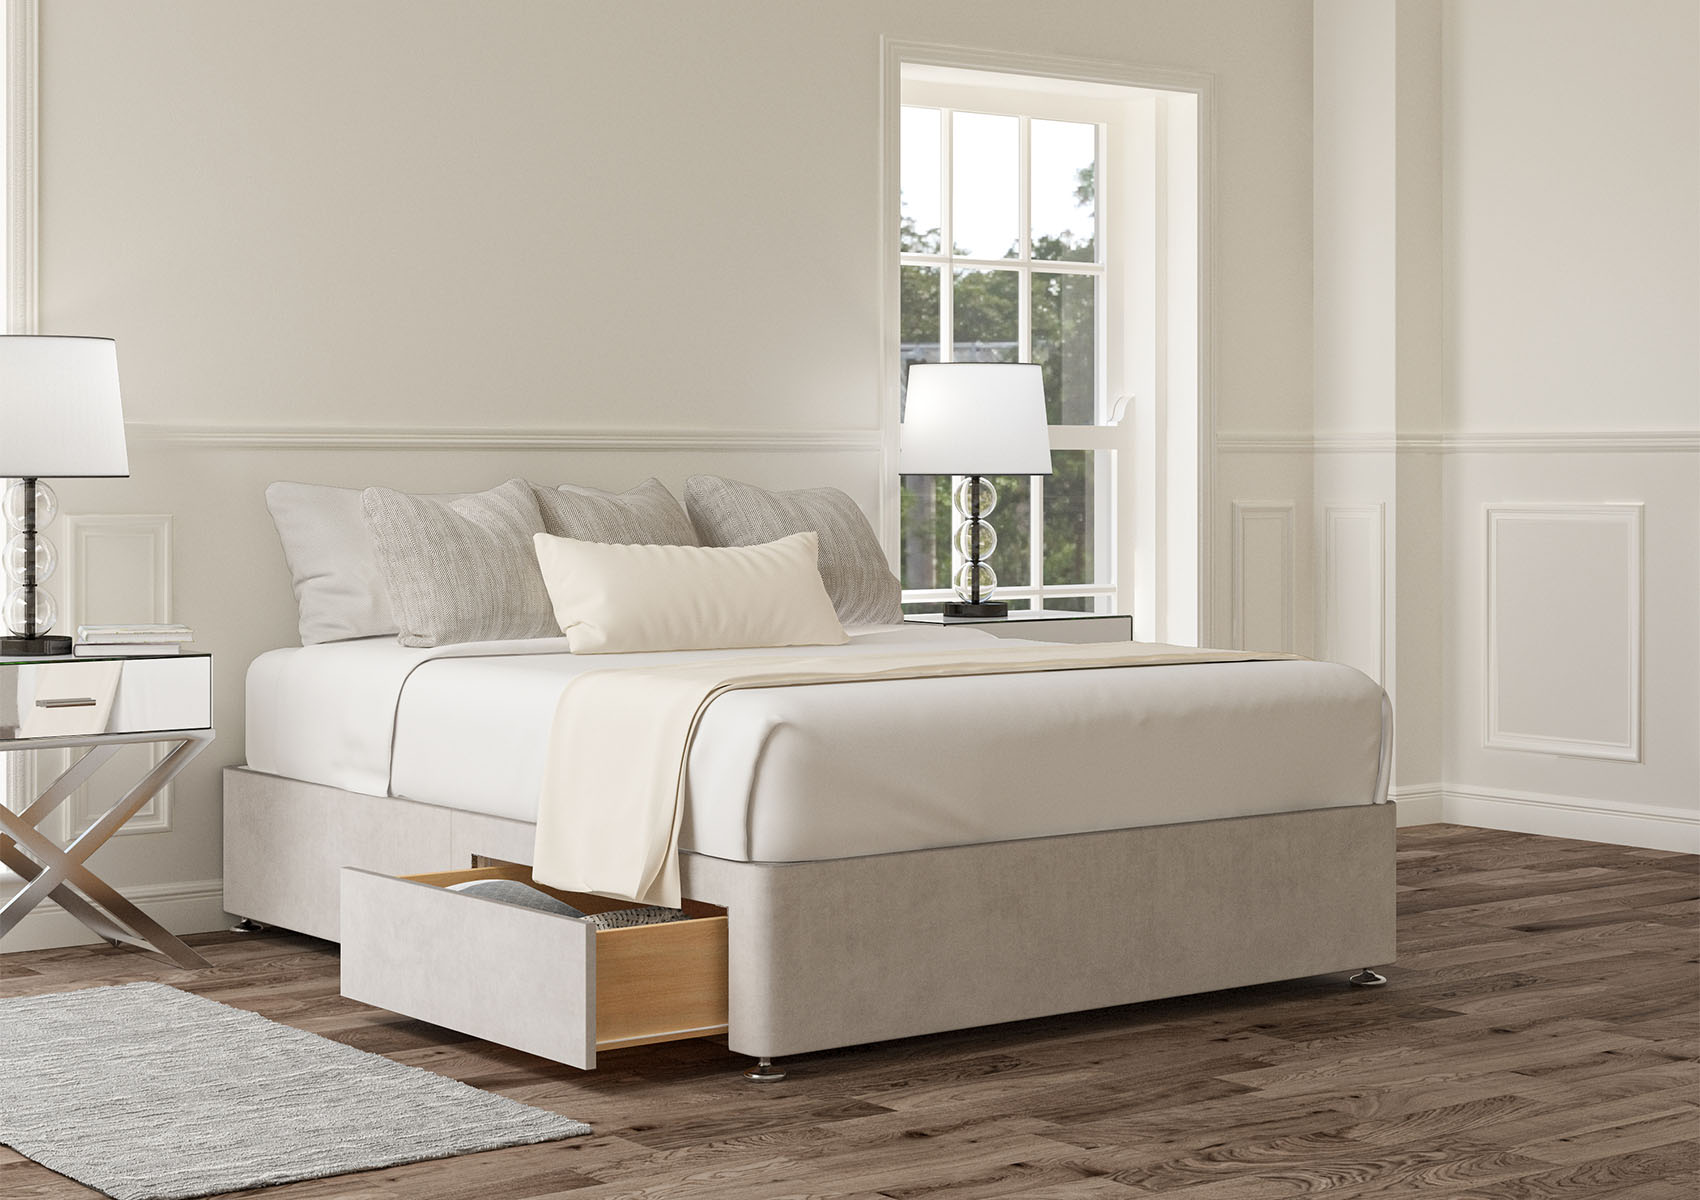 View 2 Siera Silver Upholstered Super King Storage Bed Time4Sleep information